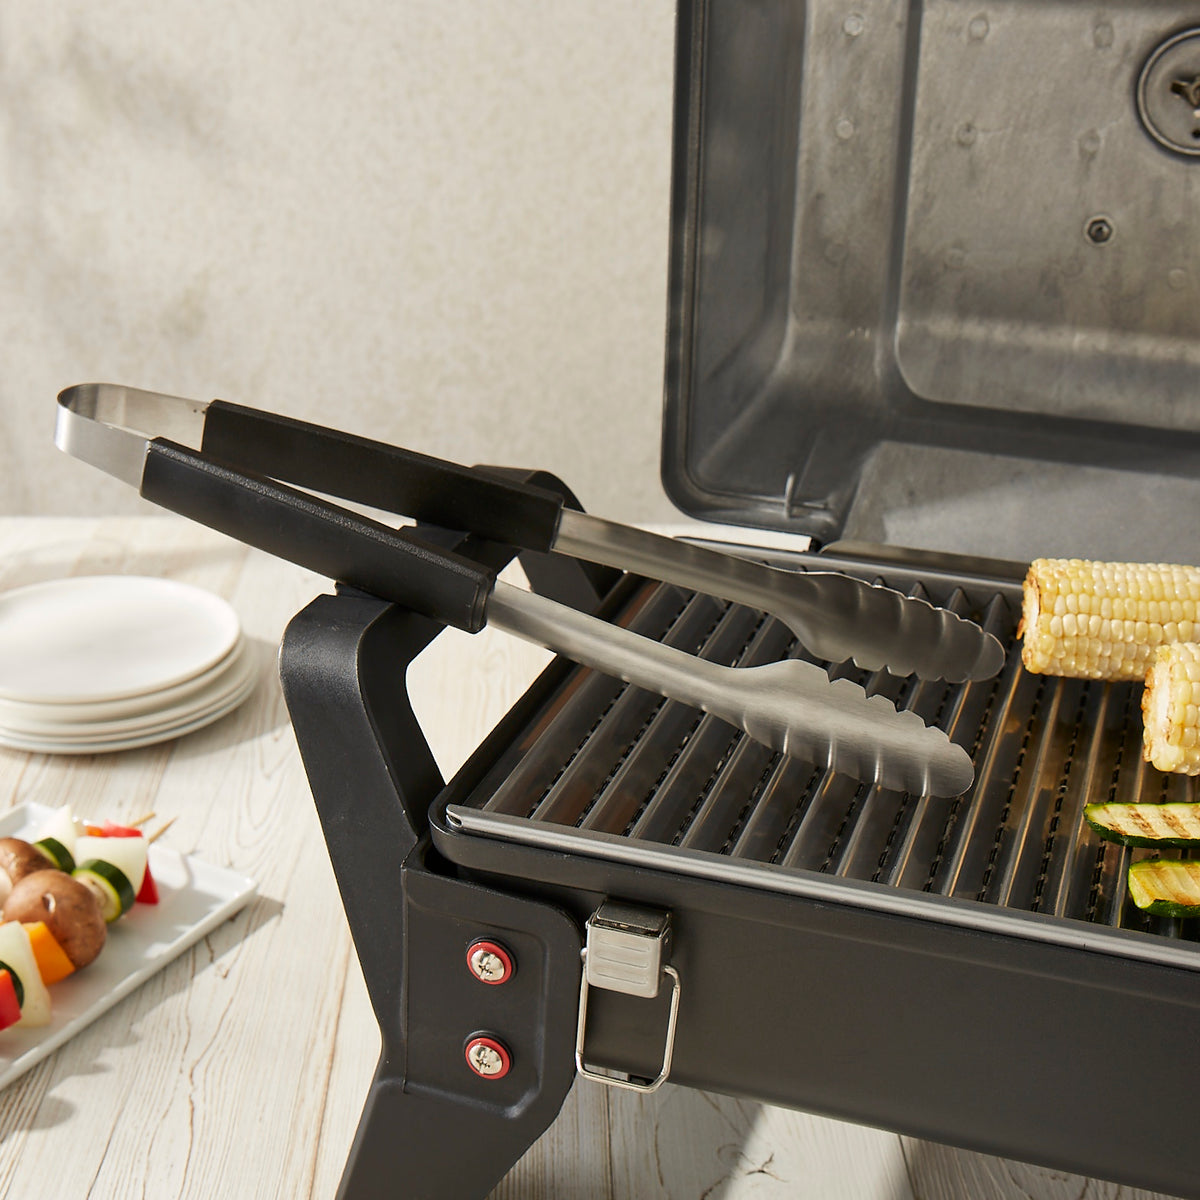 Lifestyle photo, grill tongs resting on the side of a countertop mini grill ready to serve up some roasted corn on the cob and zucchini fries.